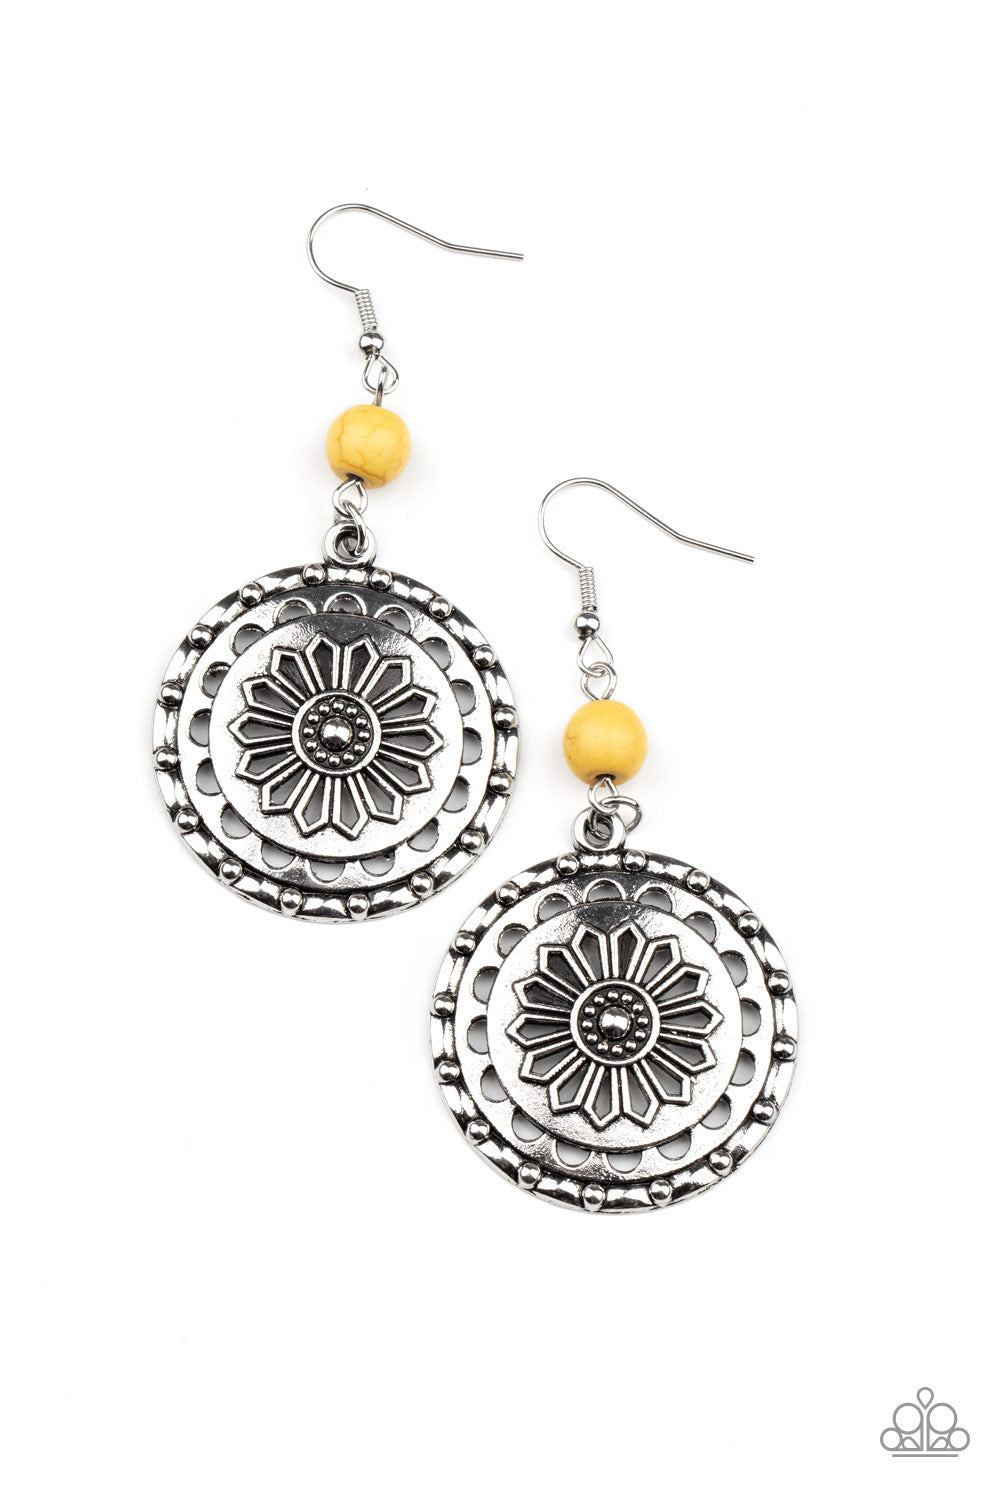 Paparazzi Accessories Flowering Frontiers - Yellow Earrings - Lady T Accessories